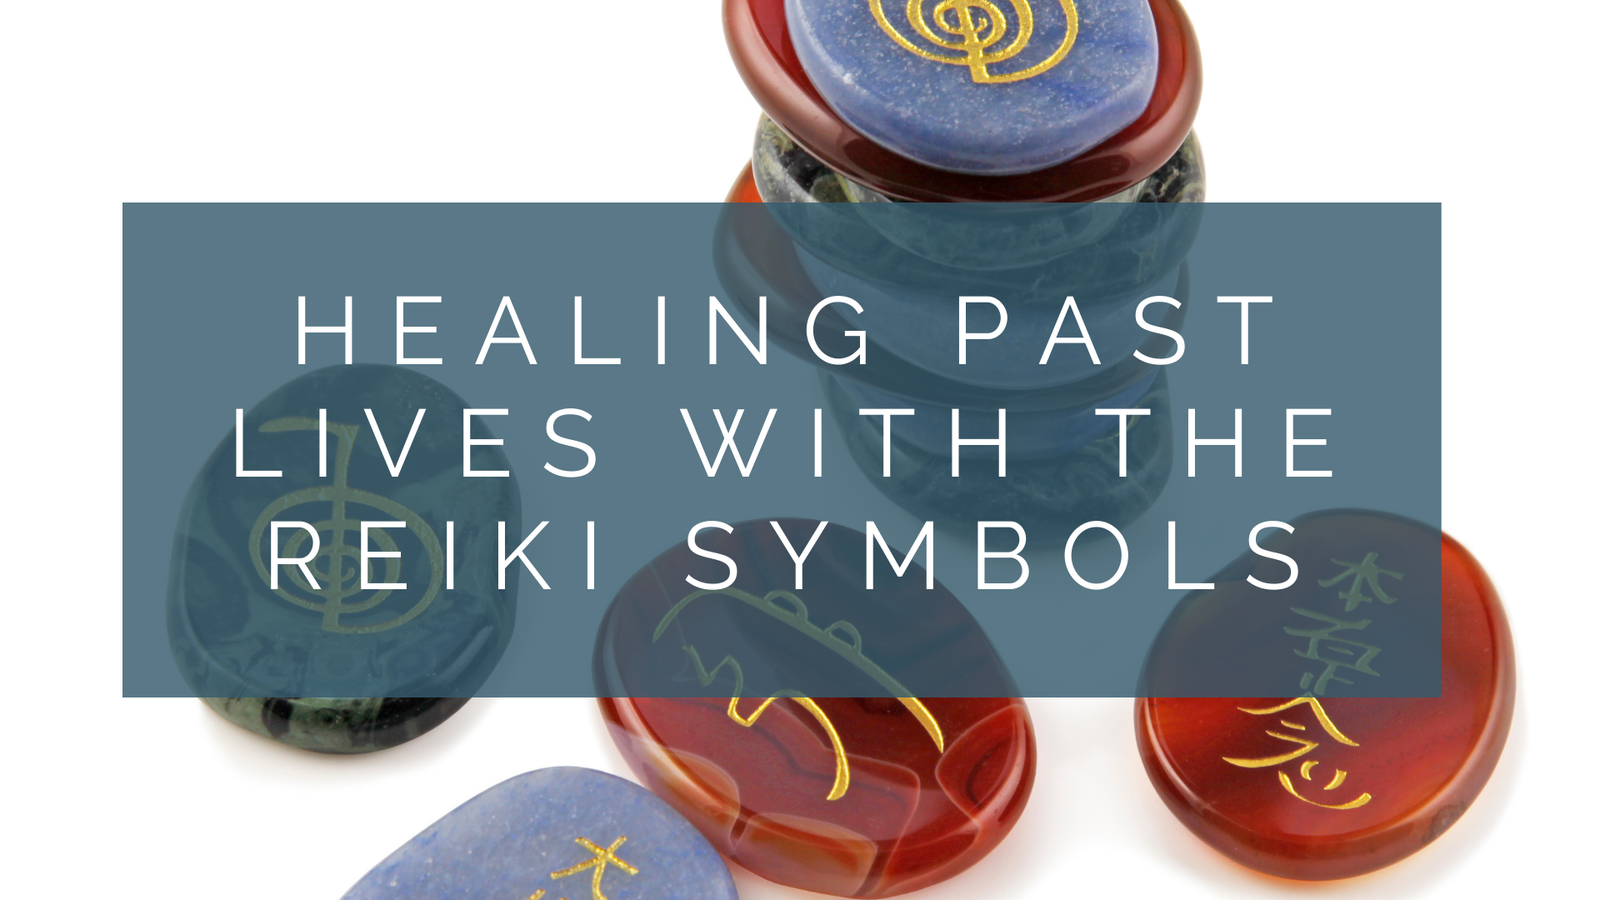 Healing Past Lives with the Reiki Symbols